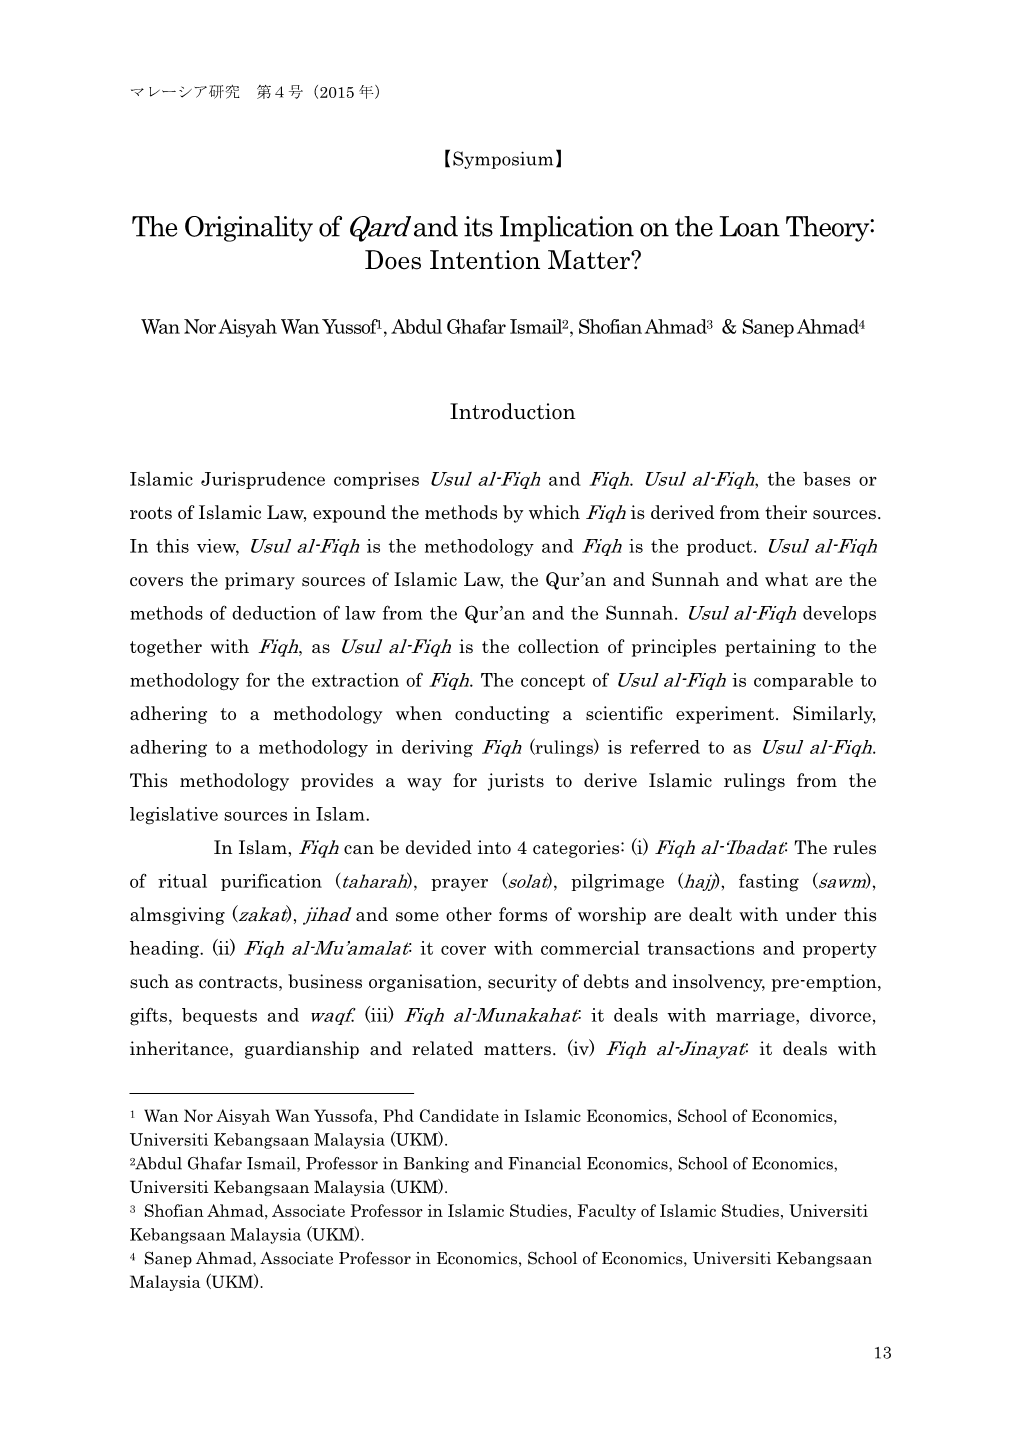 The Originality of Qard and Its Implication on the Loan Theory: Does Intention Matter?